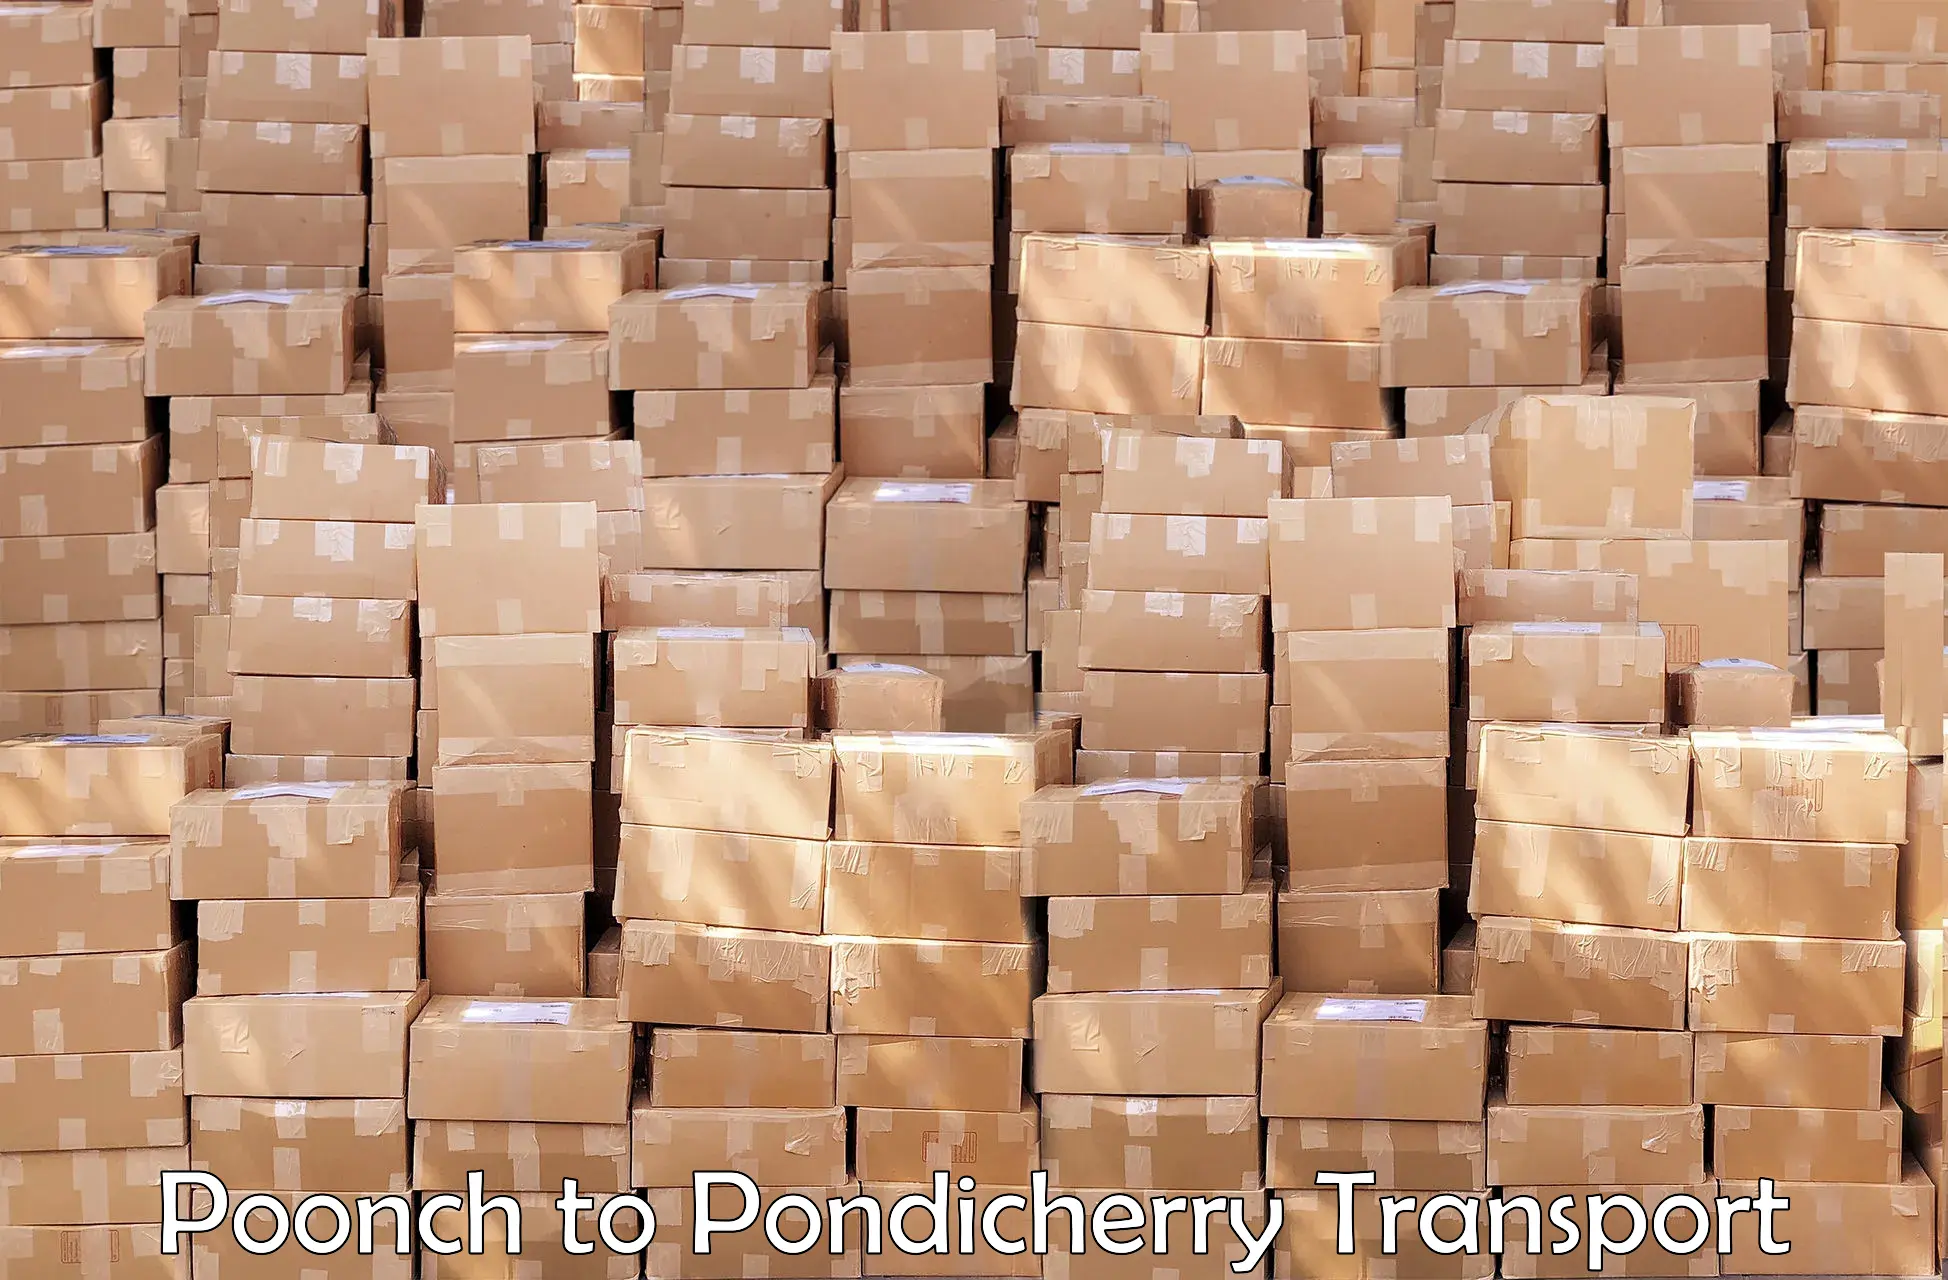 Delivery service Poonch to Pondicherry